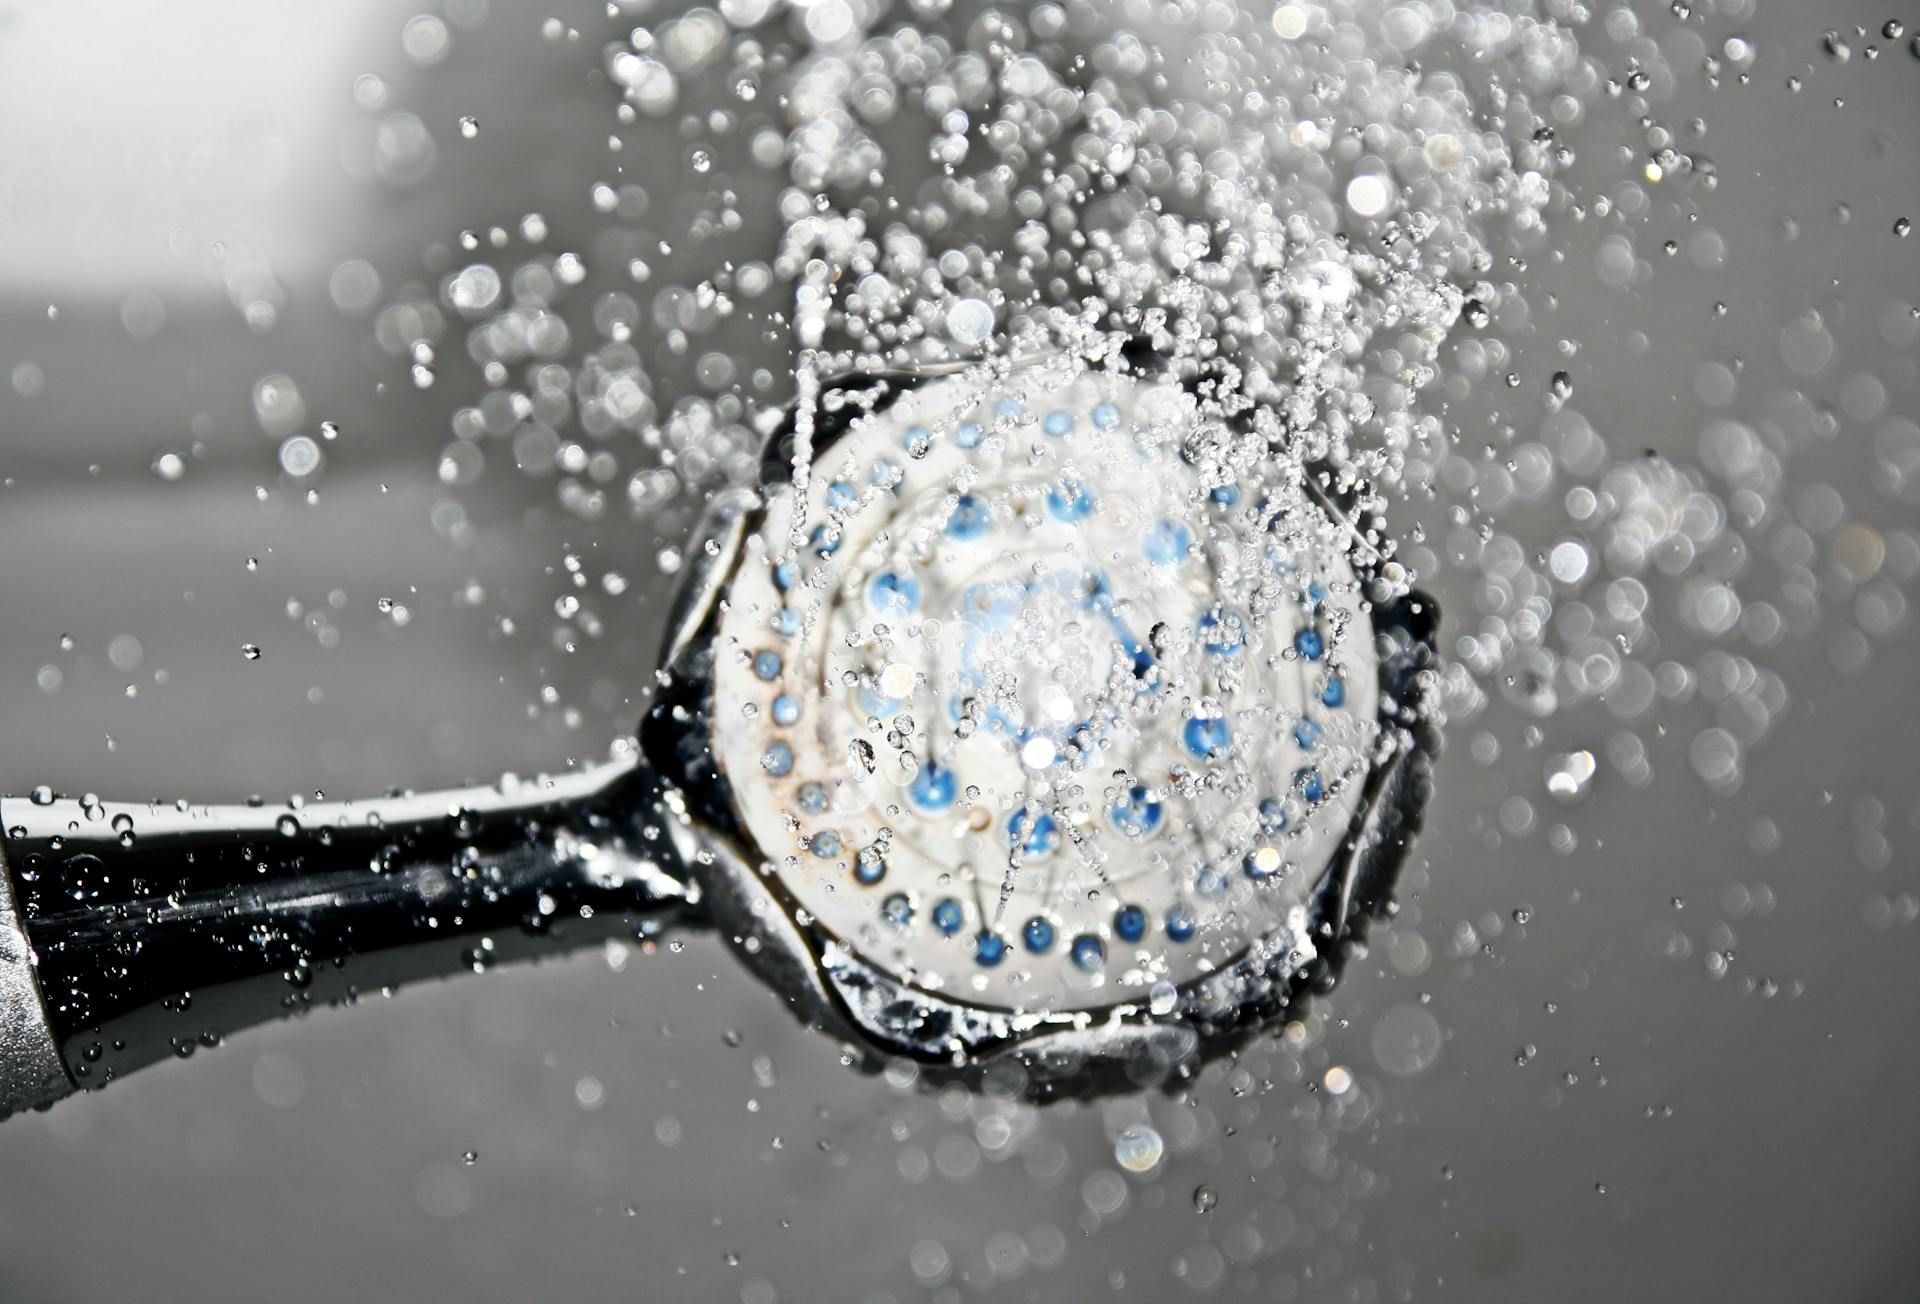 showering with filtered water